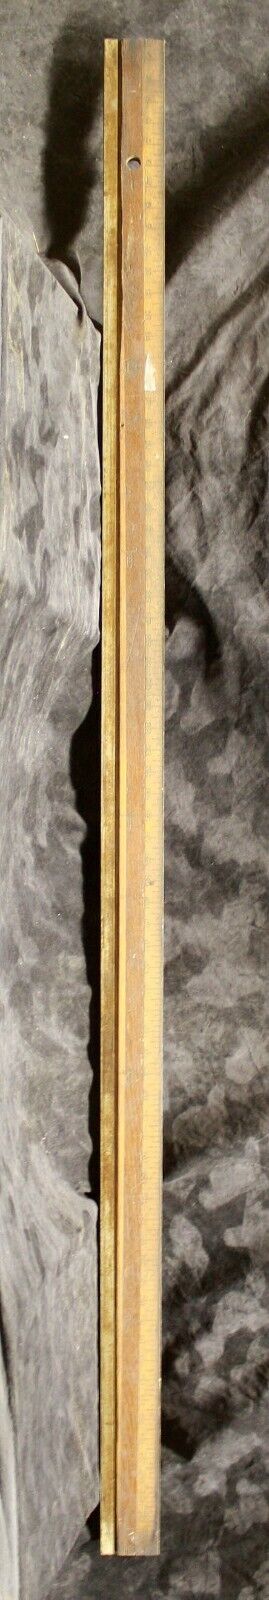 Antique Vintage Old Reclaimed Salvaged 72" 6FT "Ridgely" Wood Wooden Ruler Measuring Stick Straight